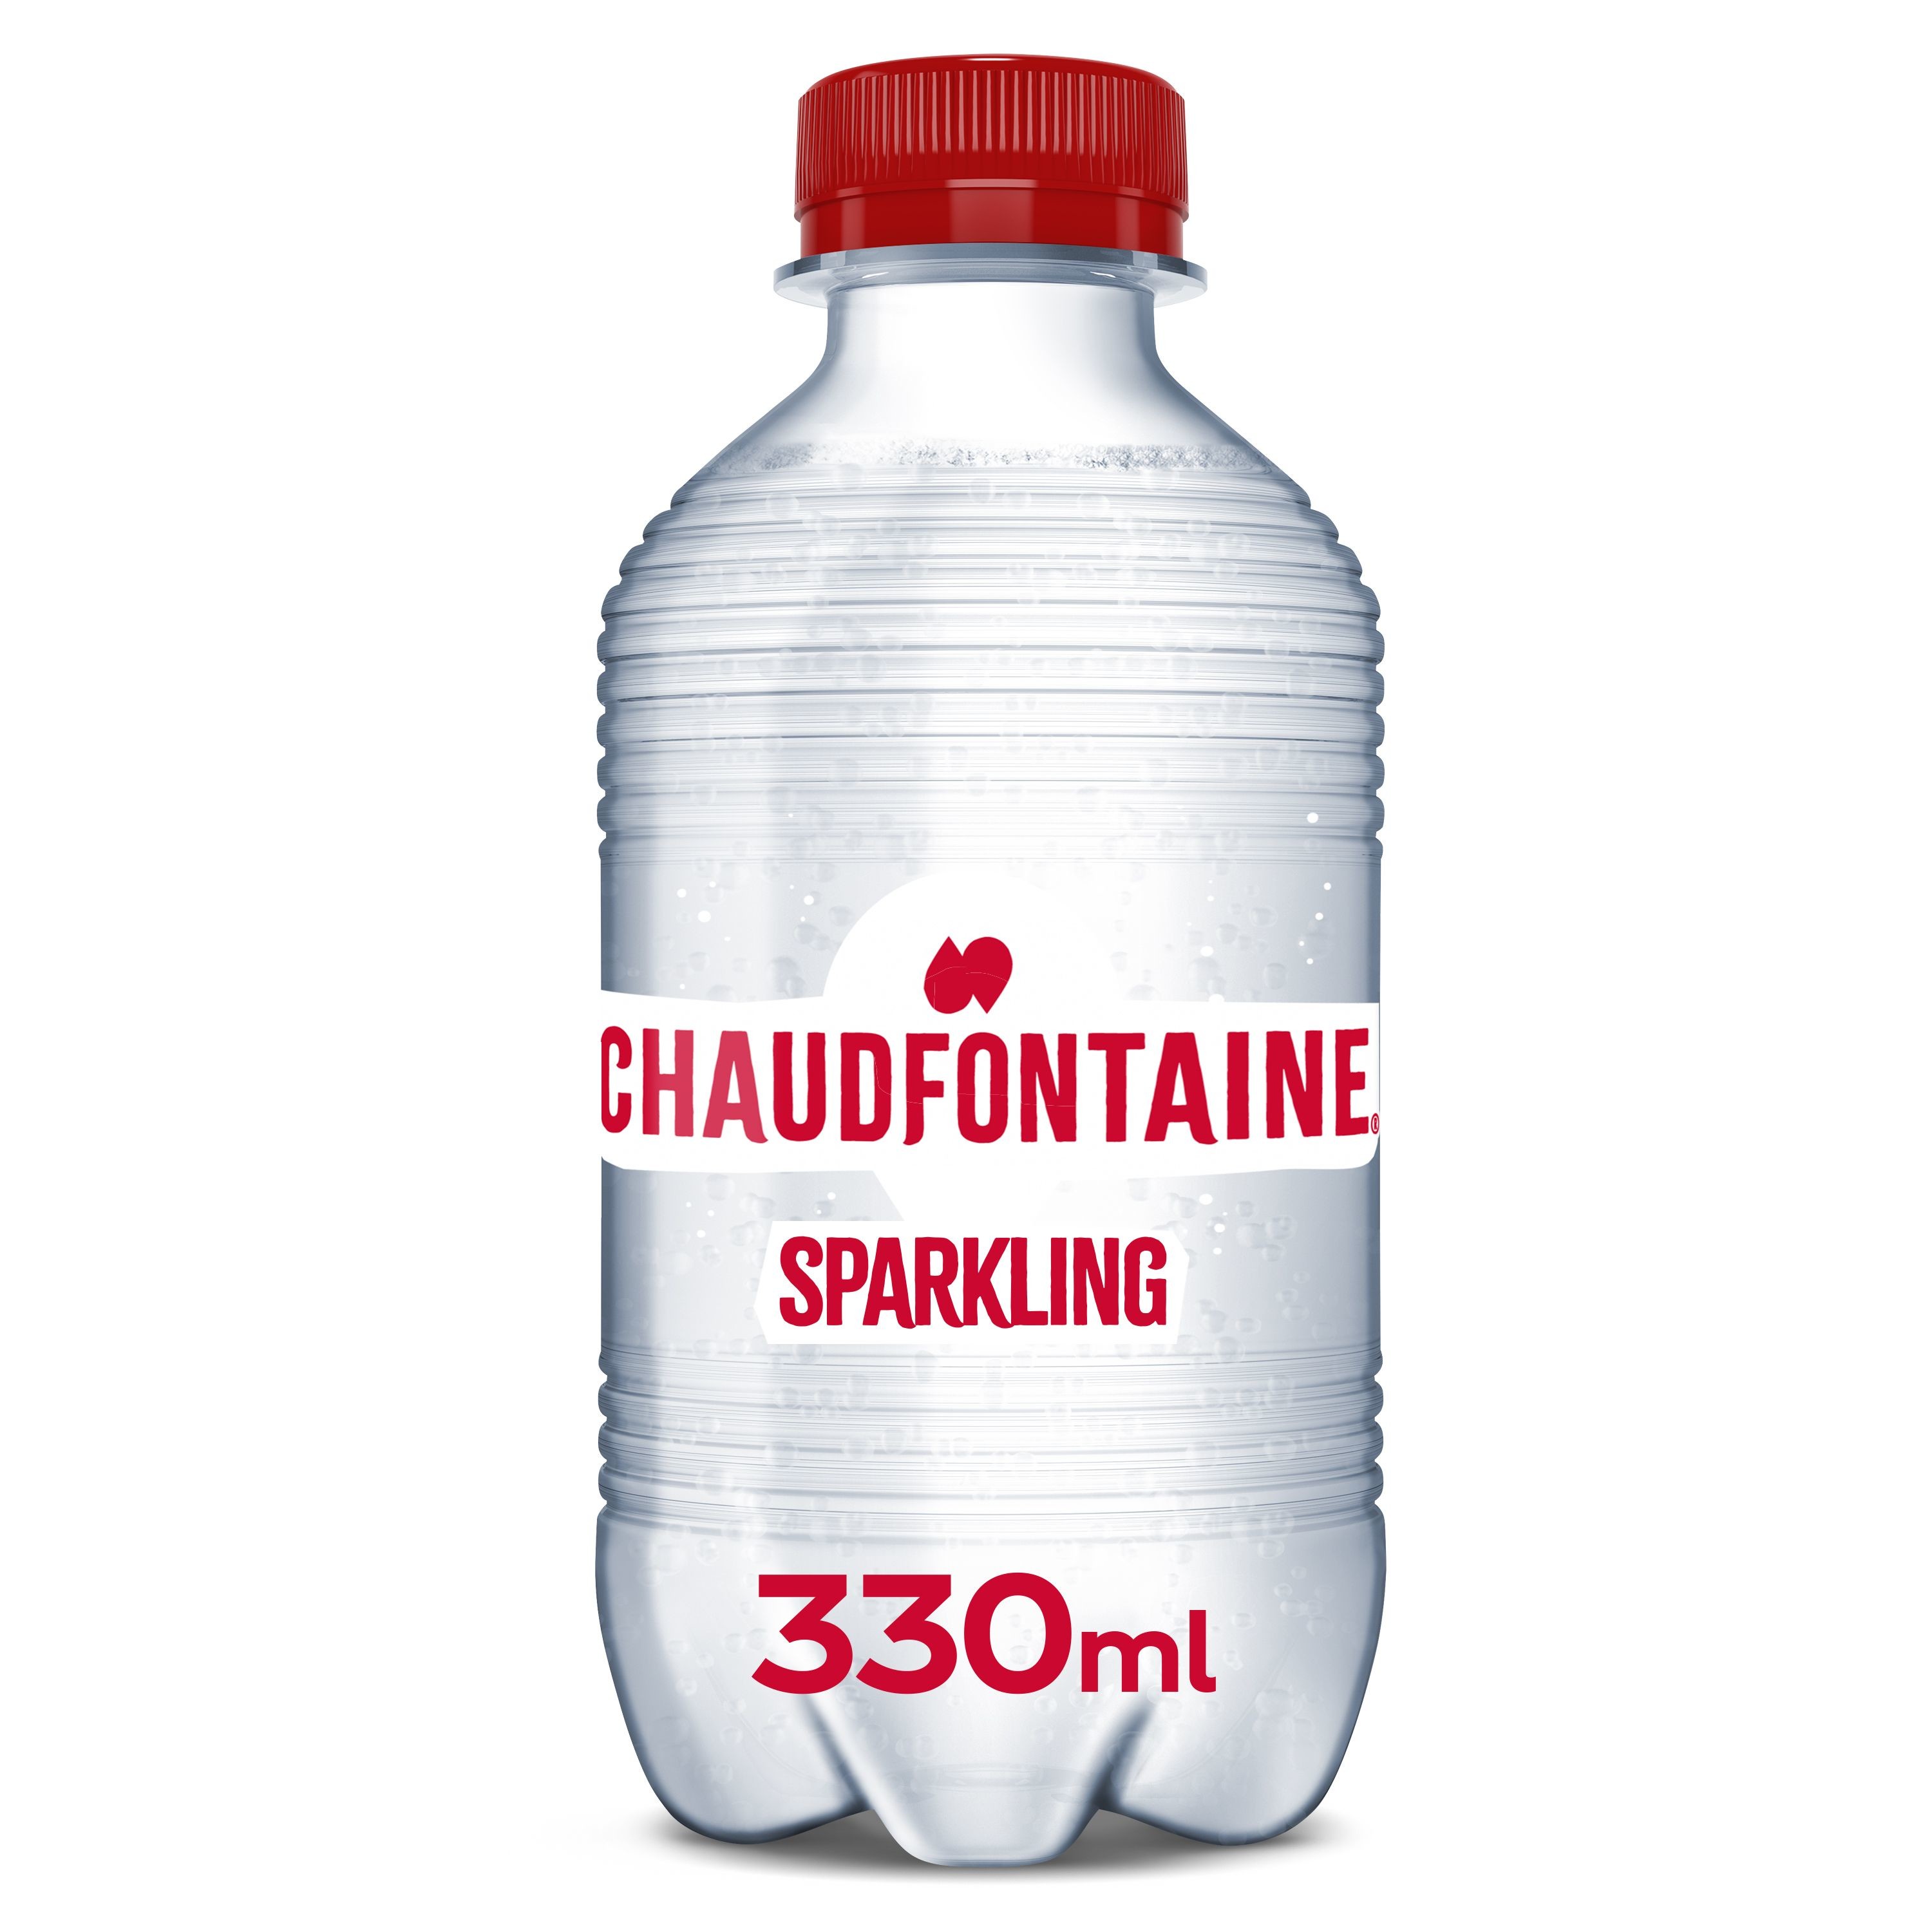 Water Chaudfontaine bruisend 33cl PET